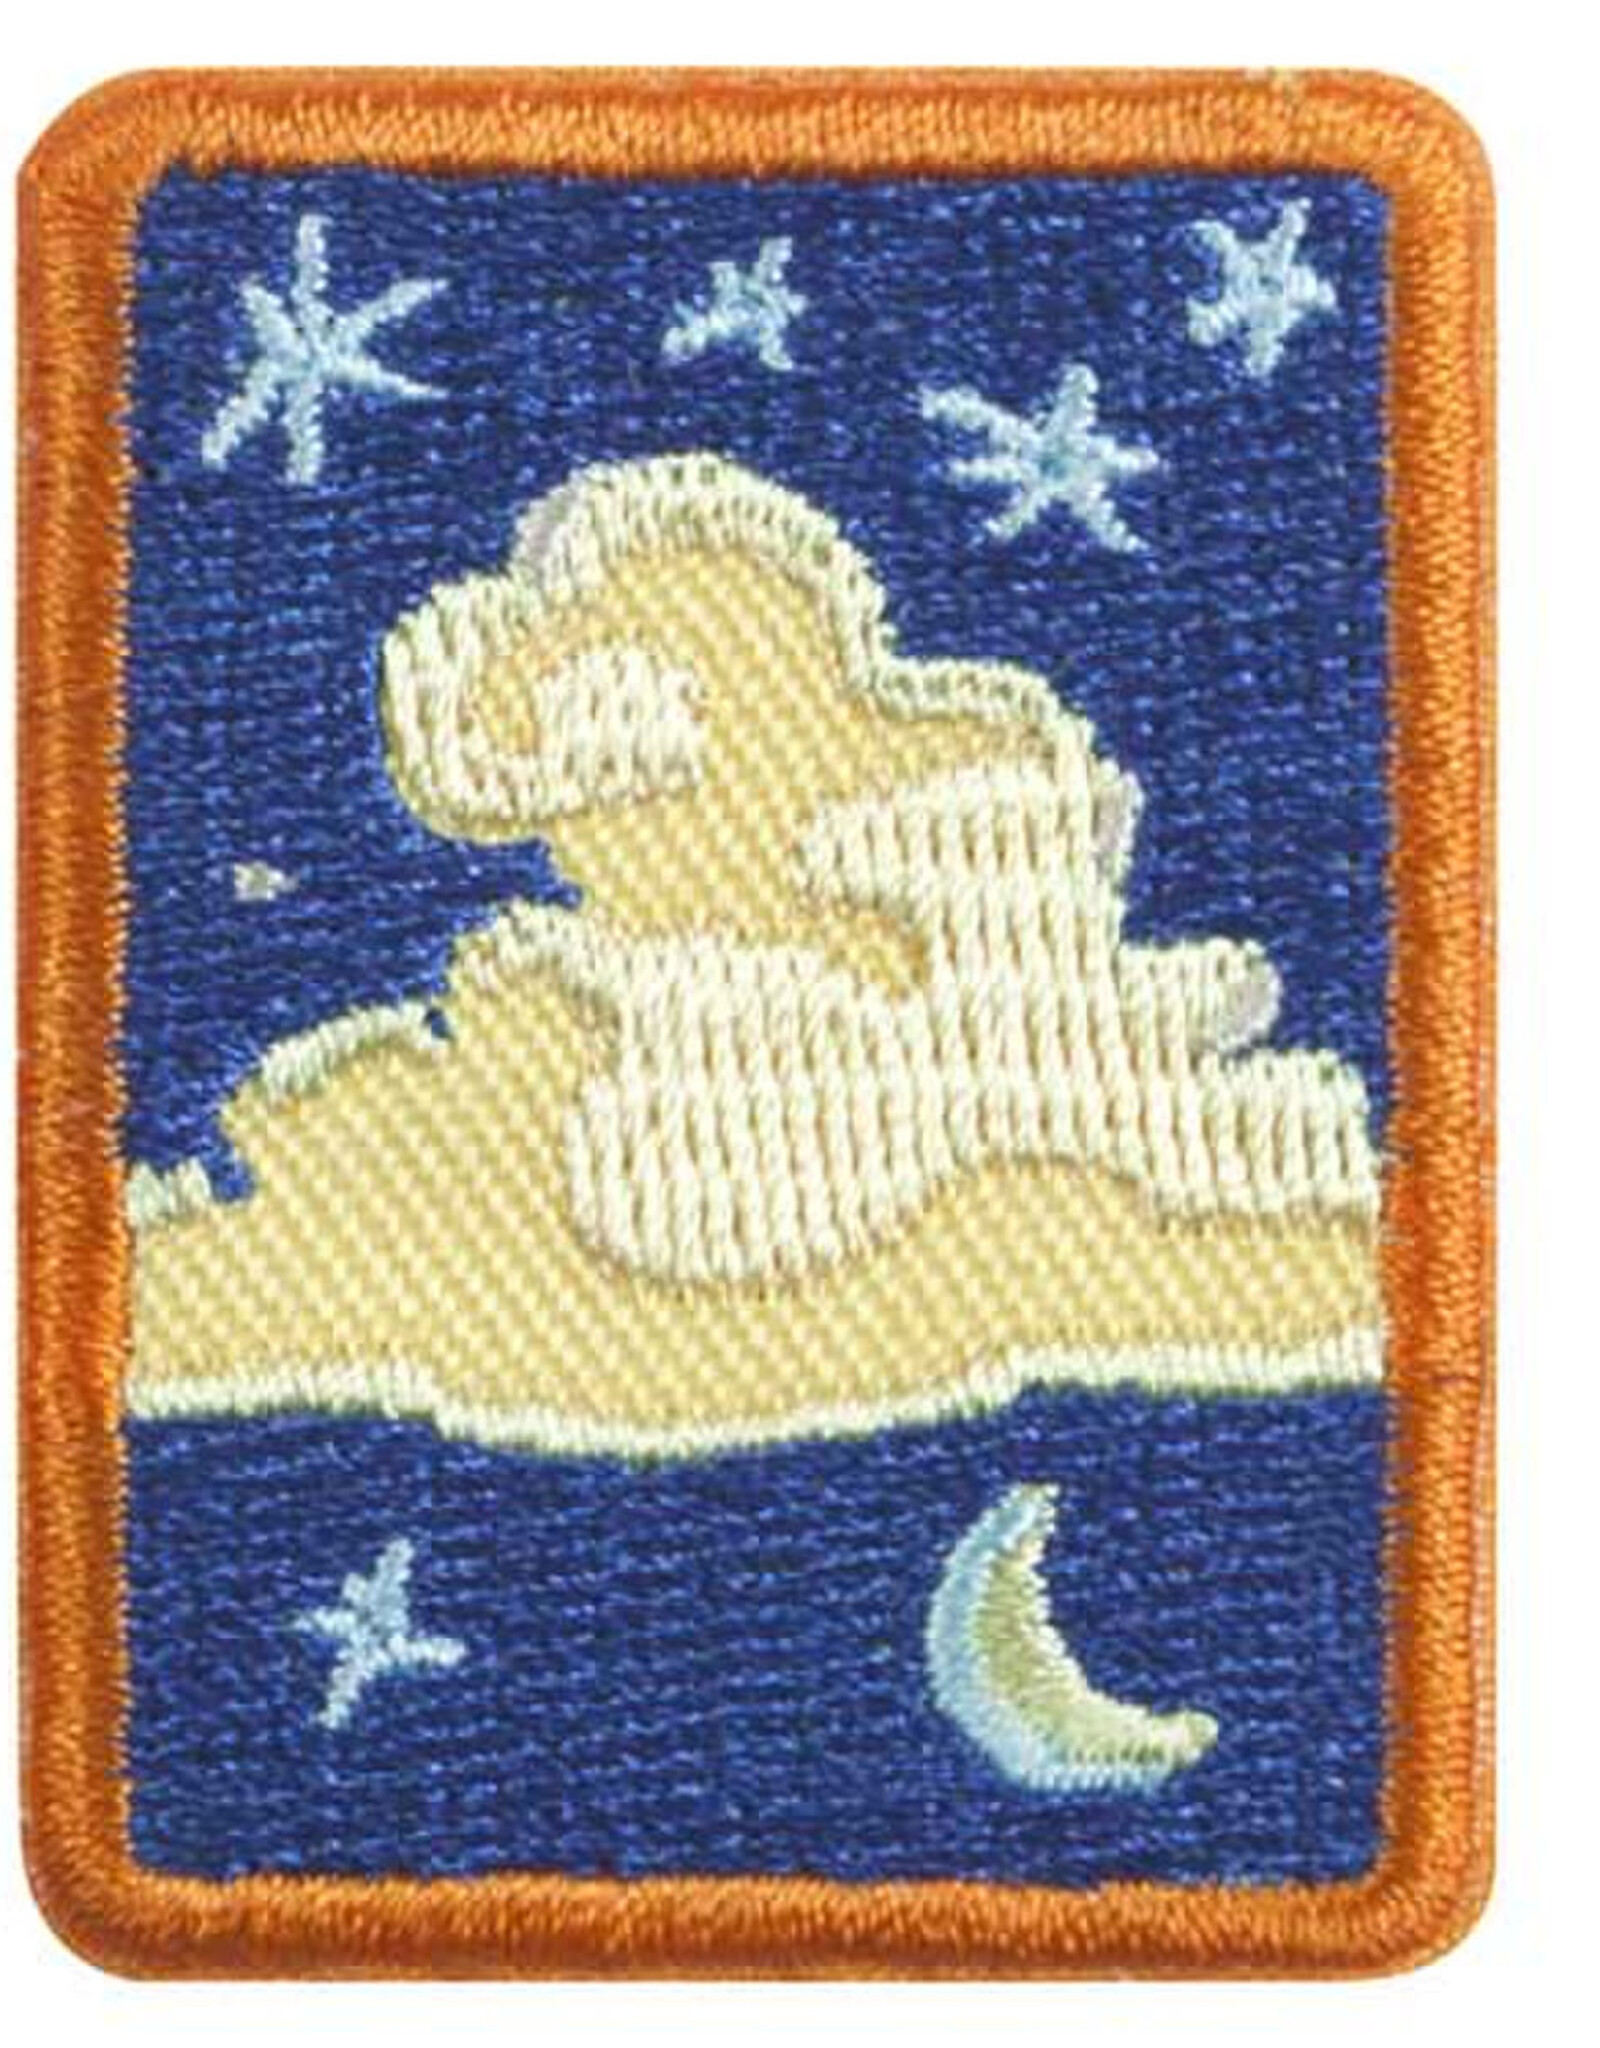 GIRL SCOUTS OF THE USA Senior Sky Badge